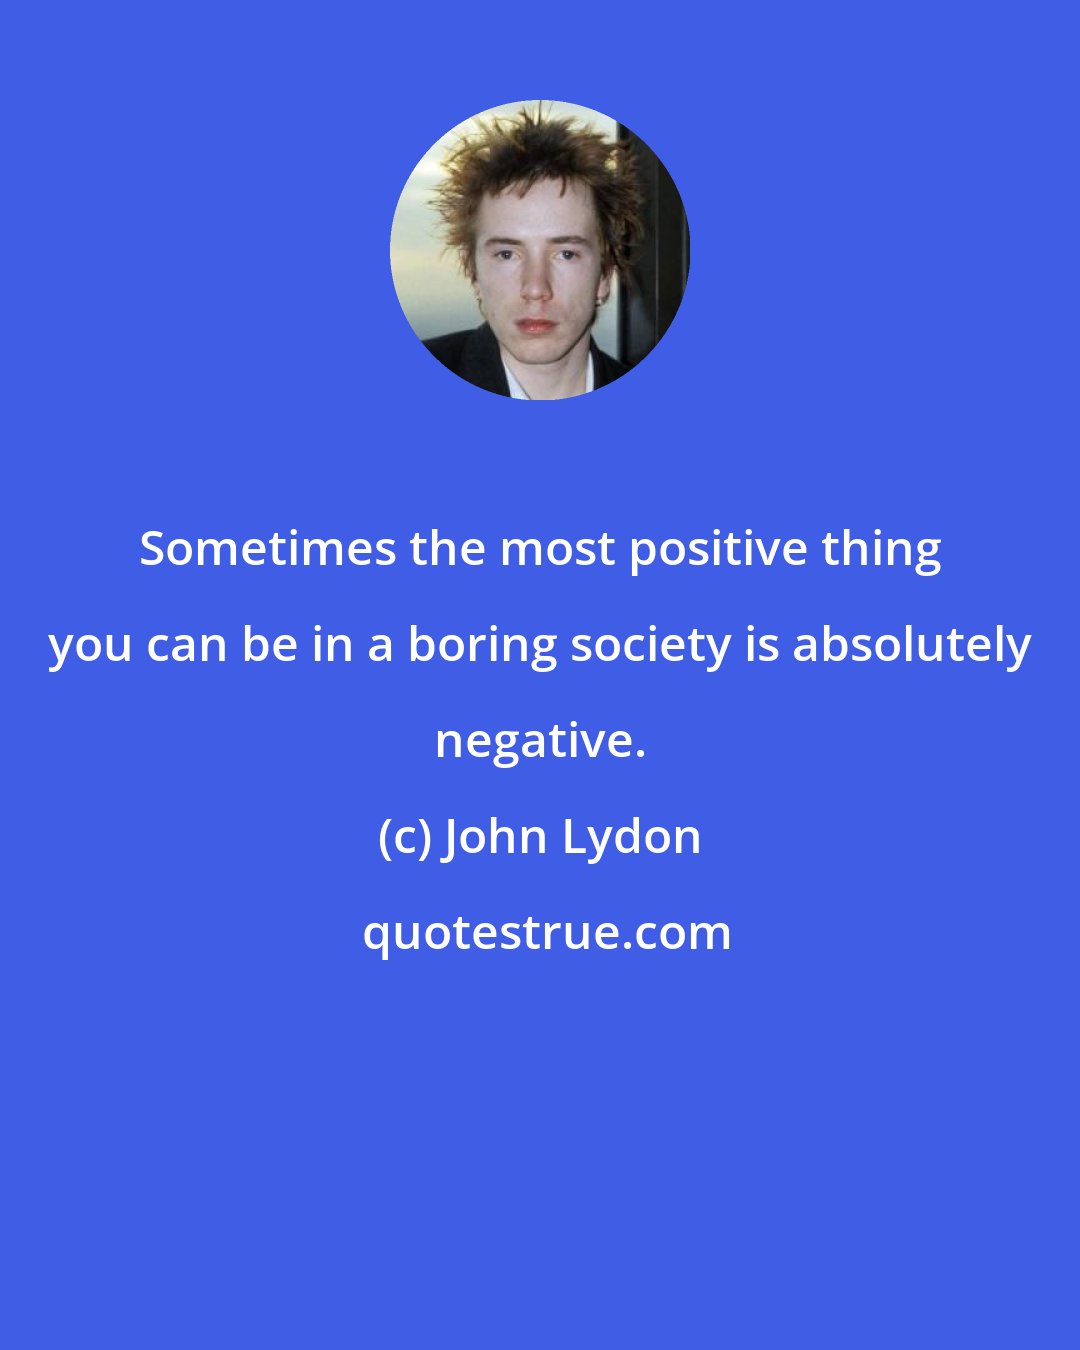 John Lydon: Sometimes the most positive thing you can be in a boring society is absolutely negative.